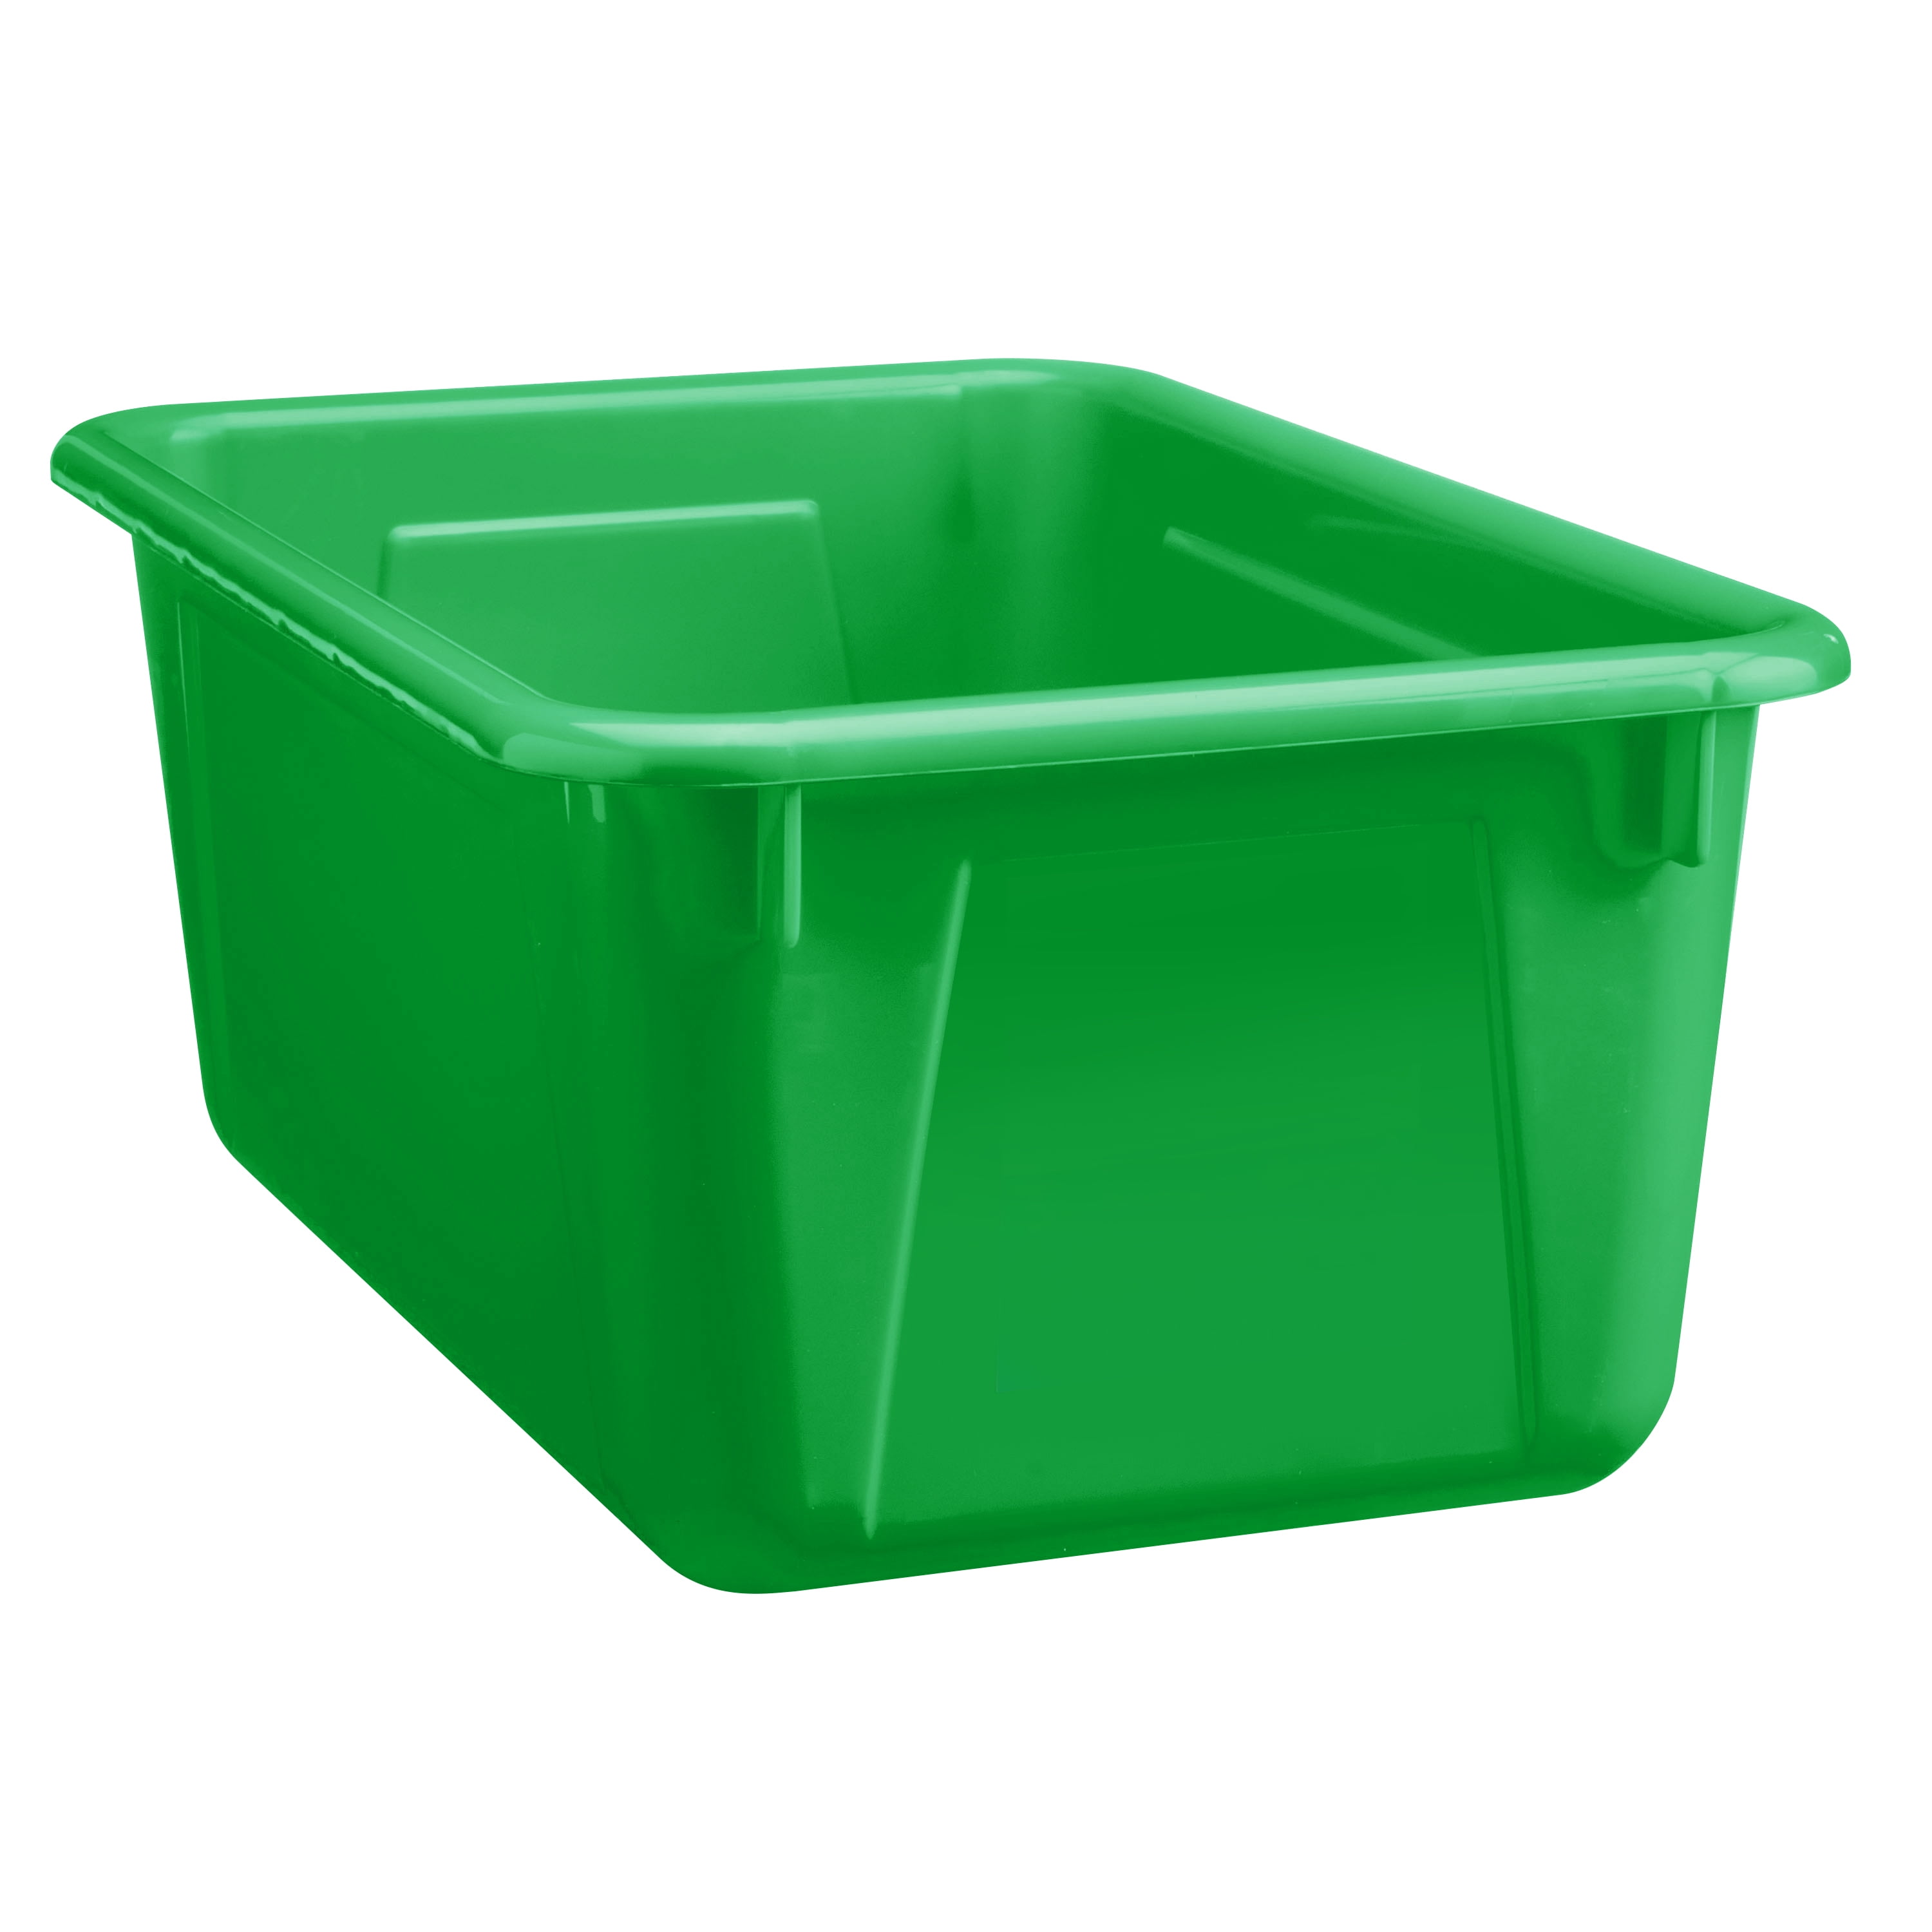 Pen+Gear Plastic Small Cubby Bin, Craft and Hobby Storage, Putting Green 